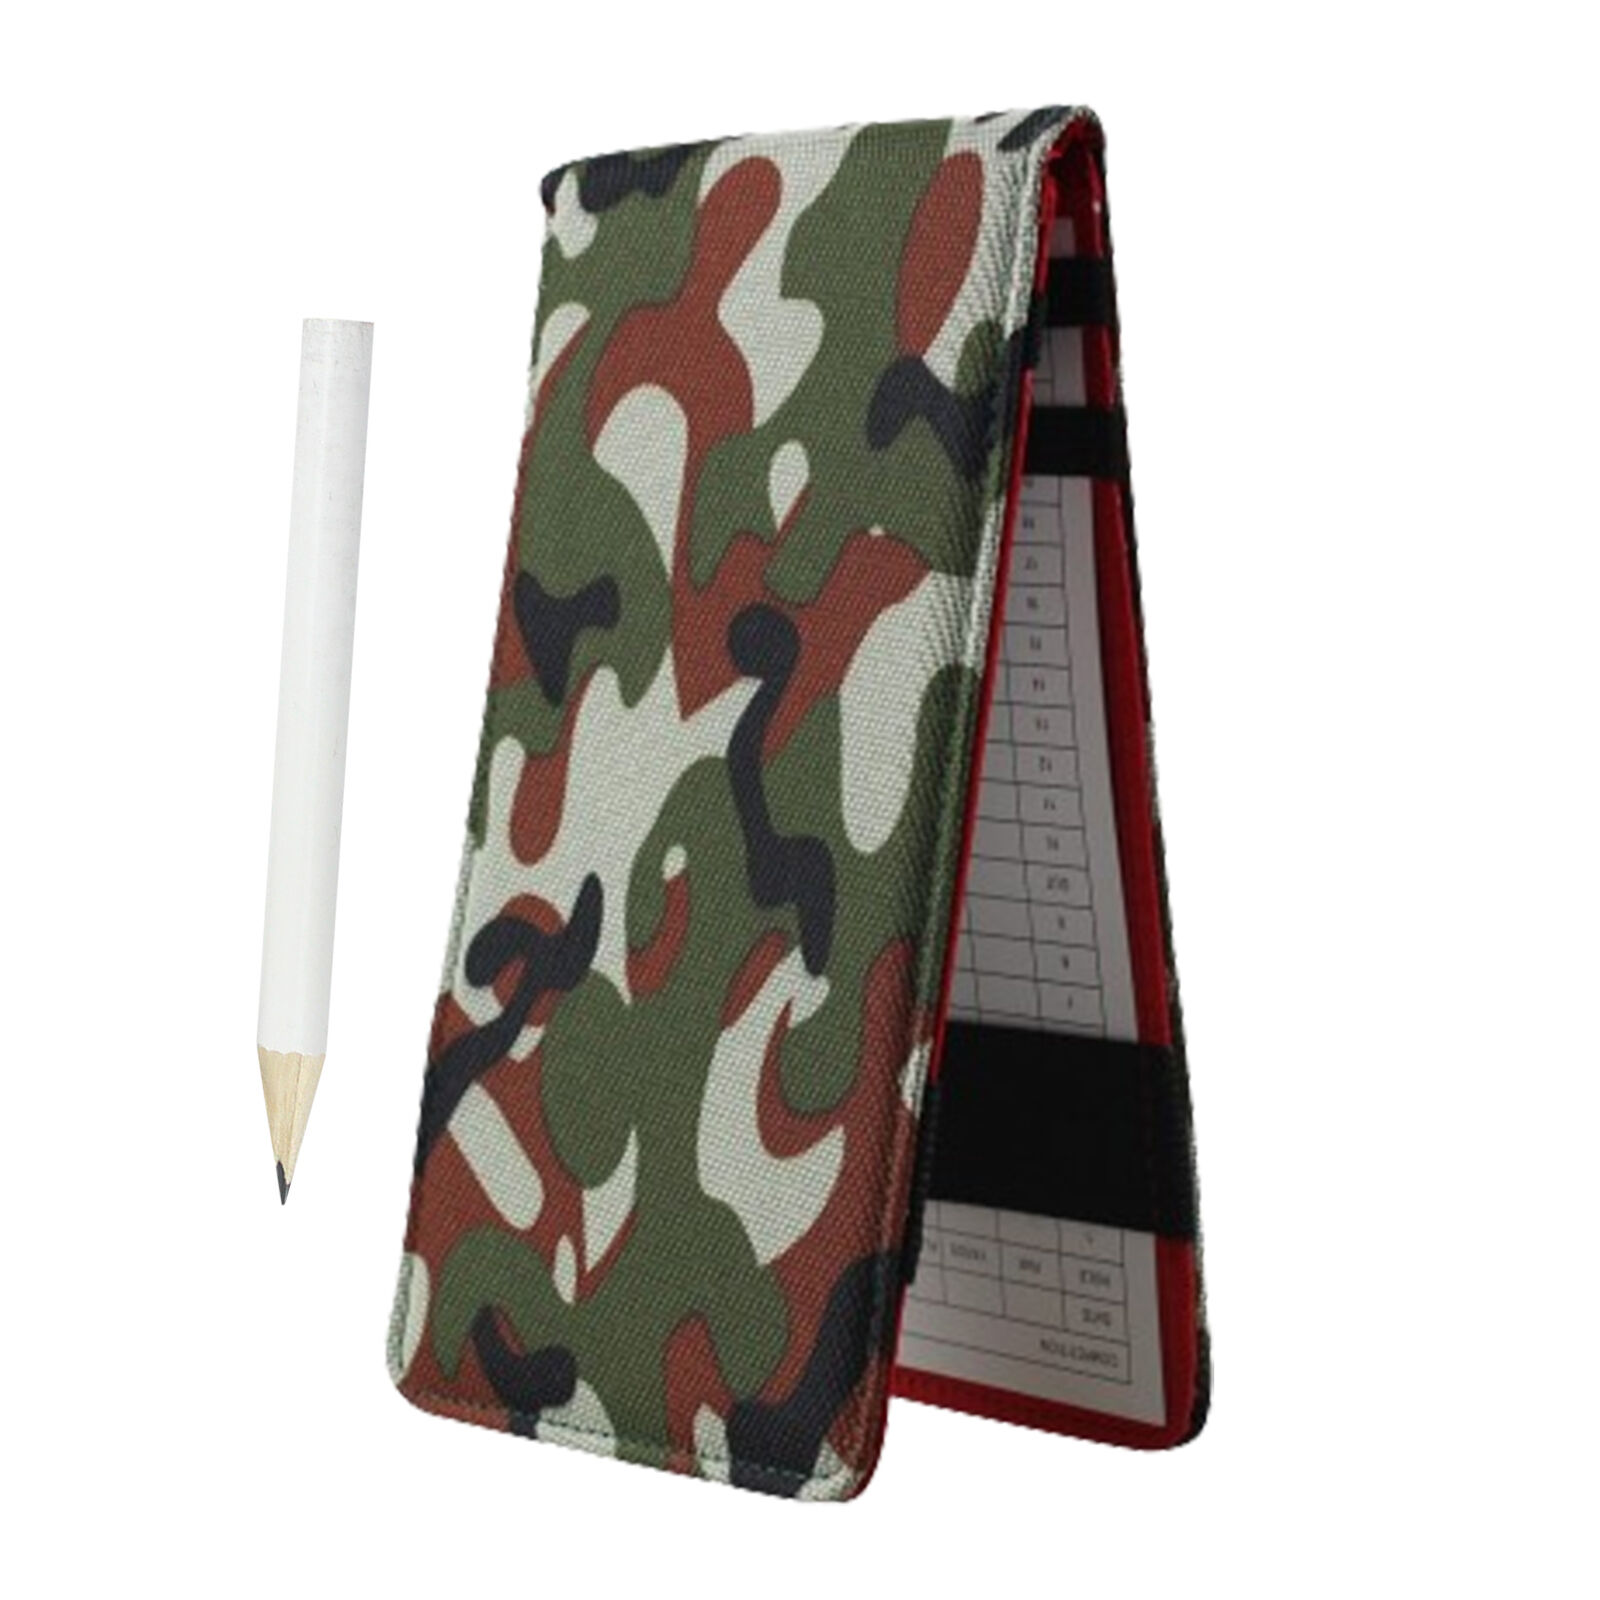 Golf Score Book Golf Journal Notebook with Pencil Oxford Cloth Club capable Unbranded does not apply - фотография #5